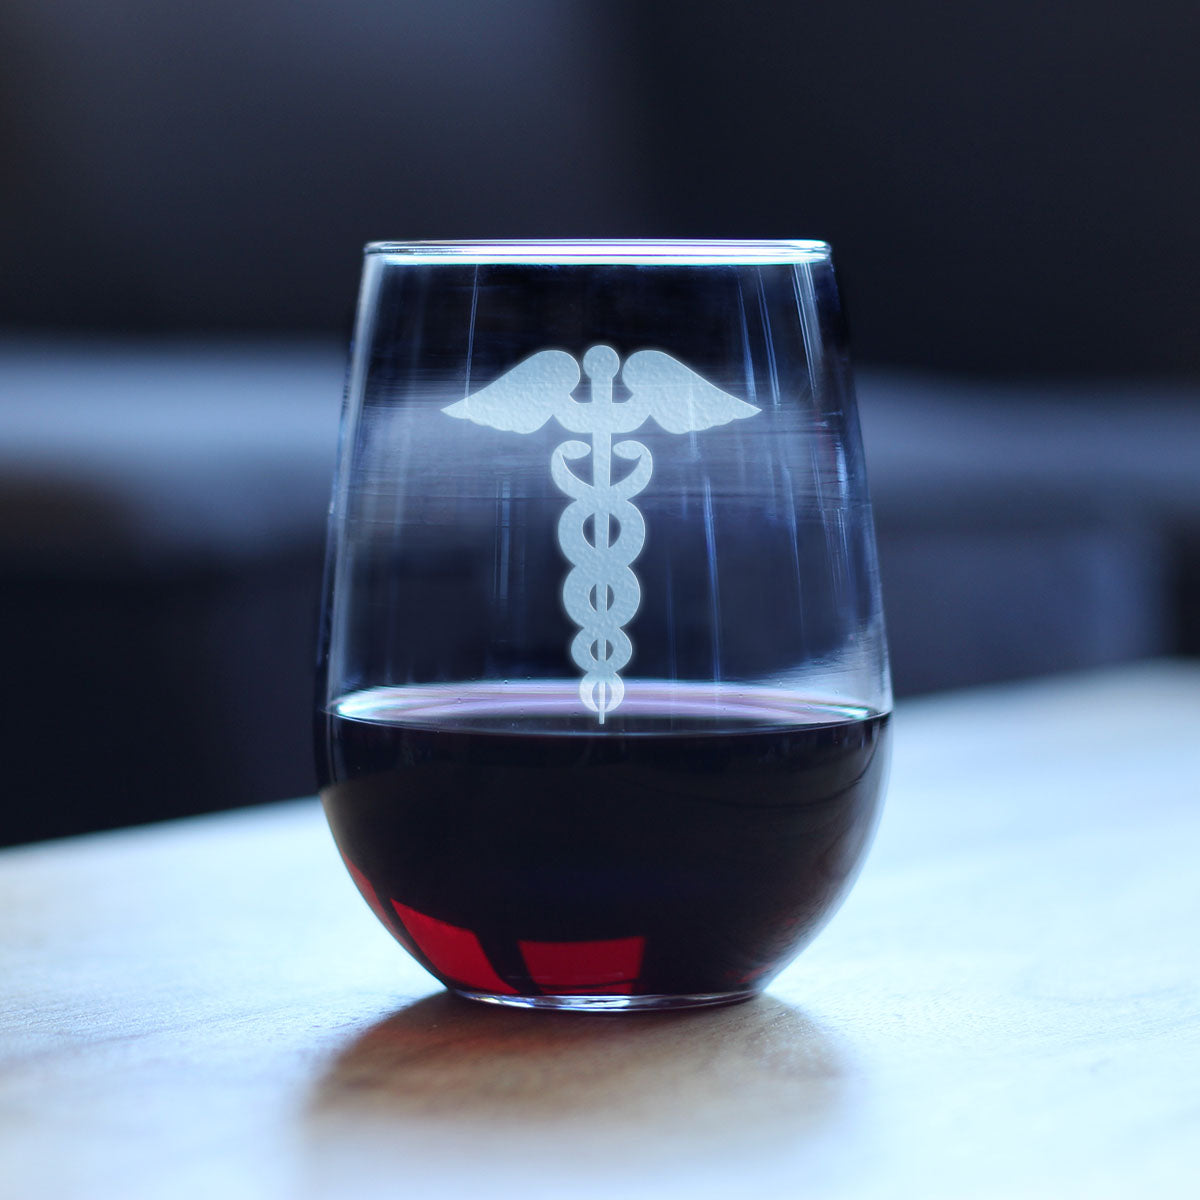 Caduceus Stemless Wine Glass for Essential Healthcare Workers, Doctors, Nurses, Medical Staff - Large 17 oz